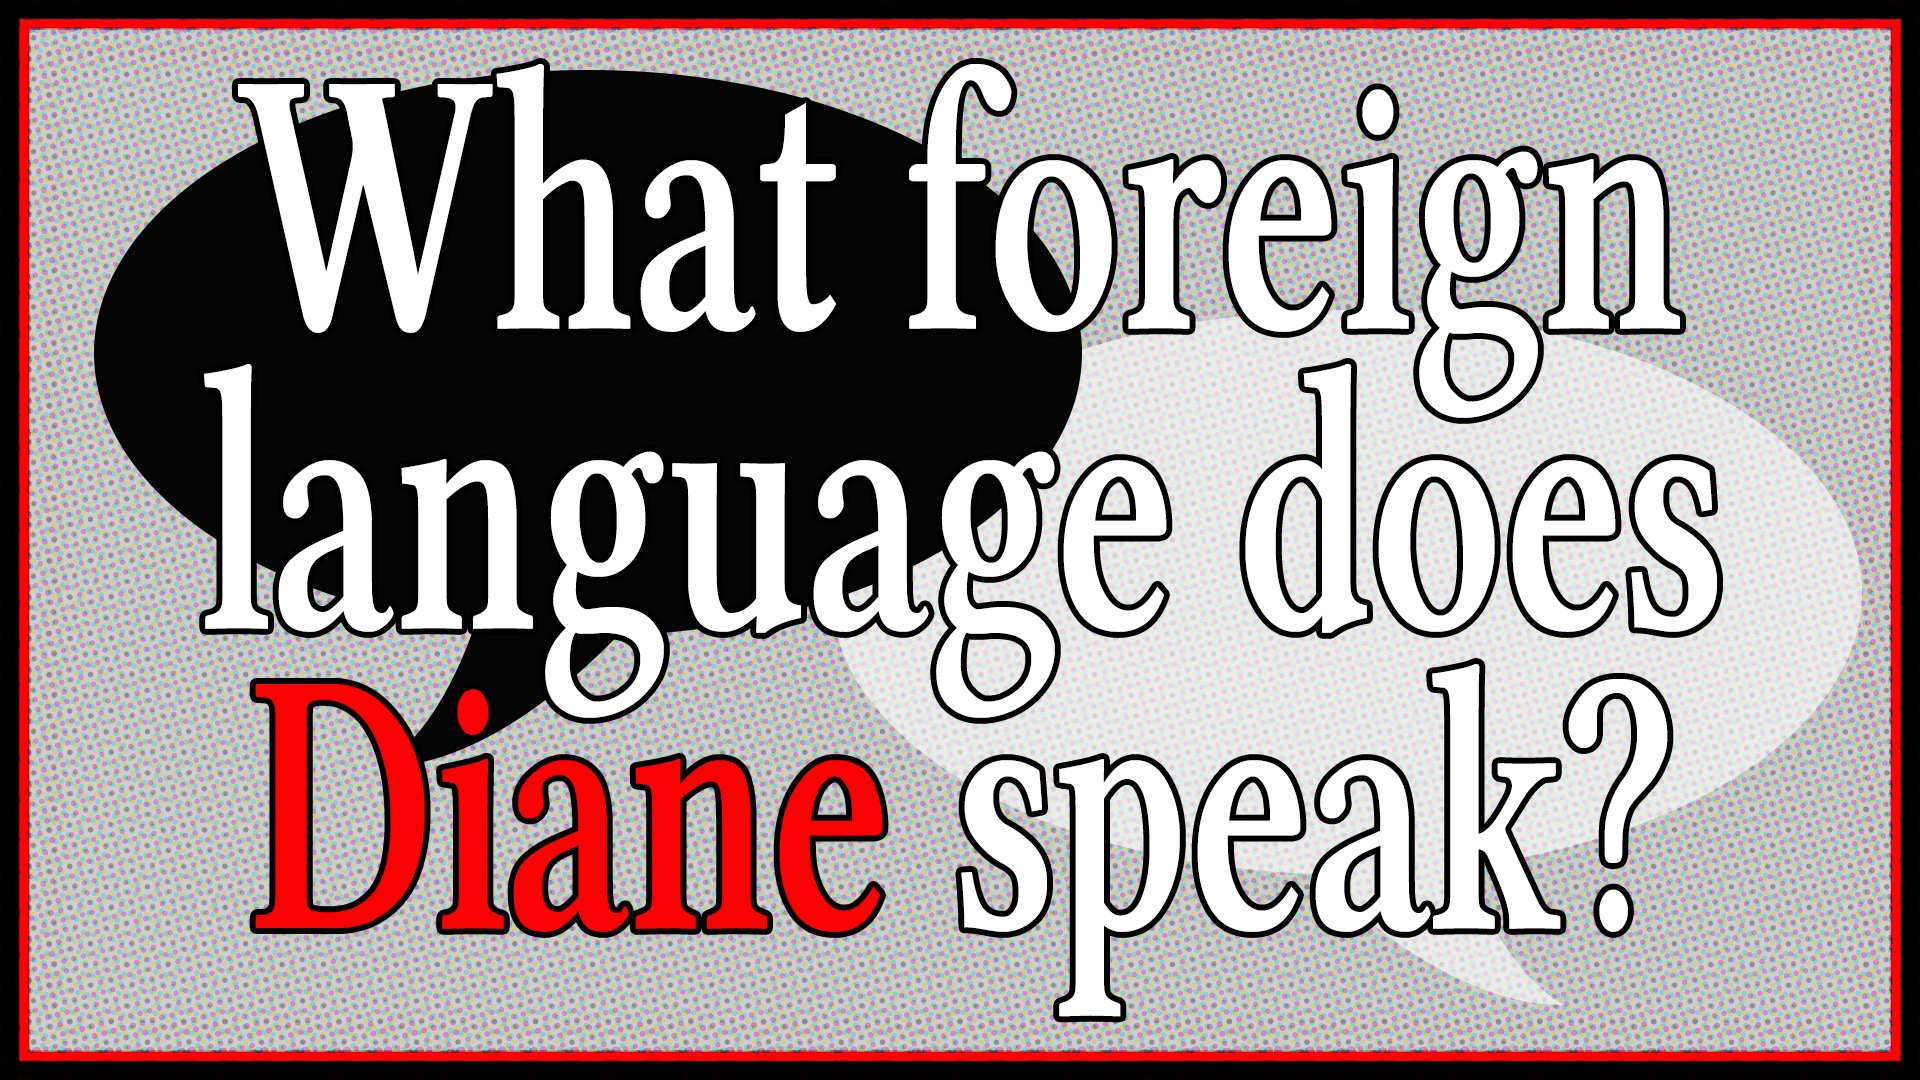 What foreign language does Diane speak?